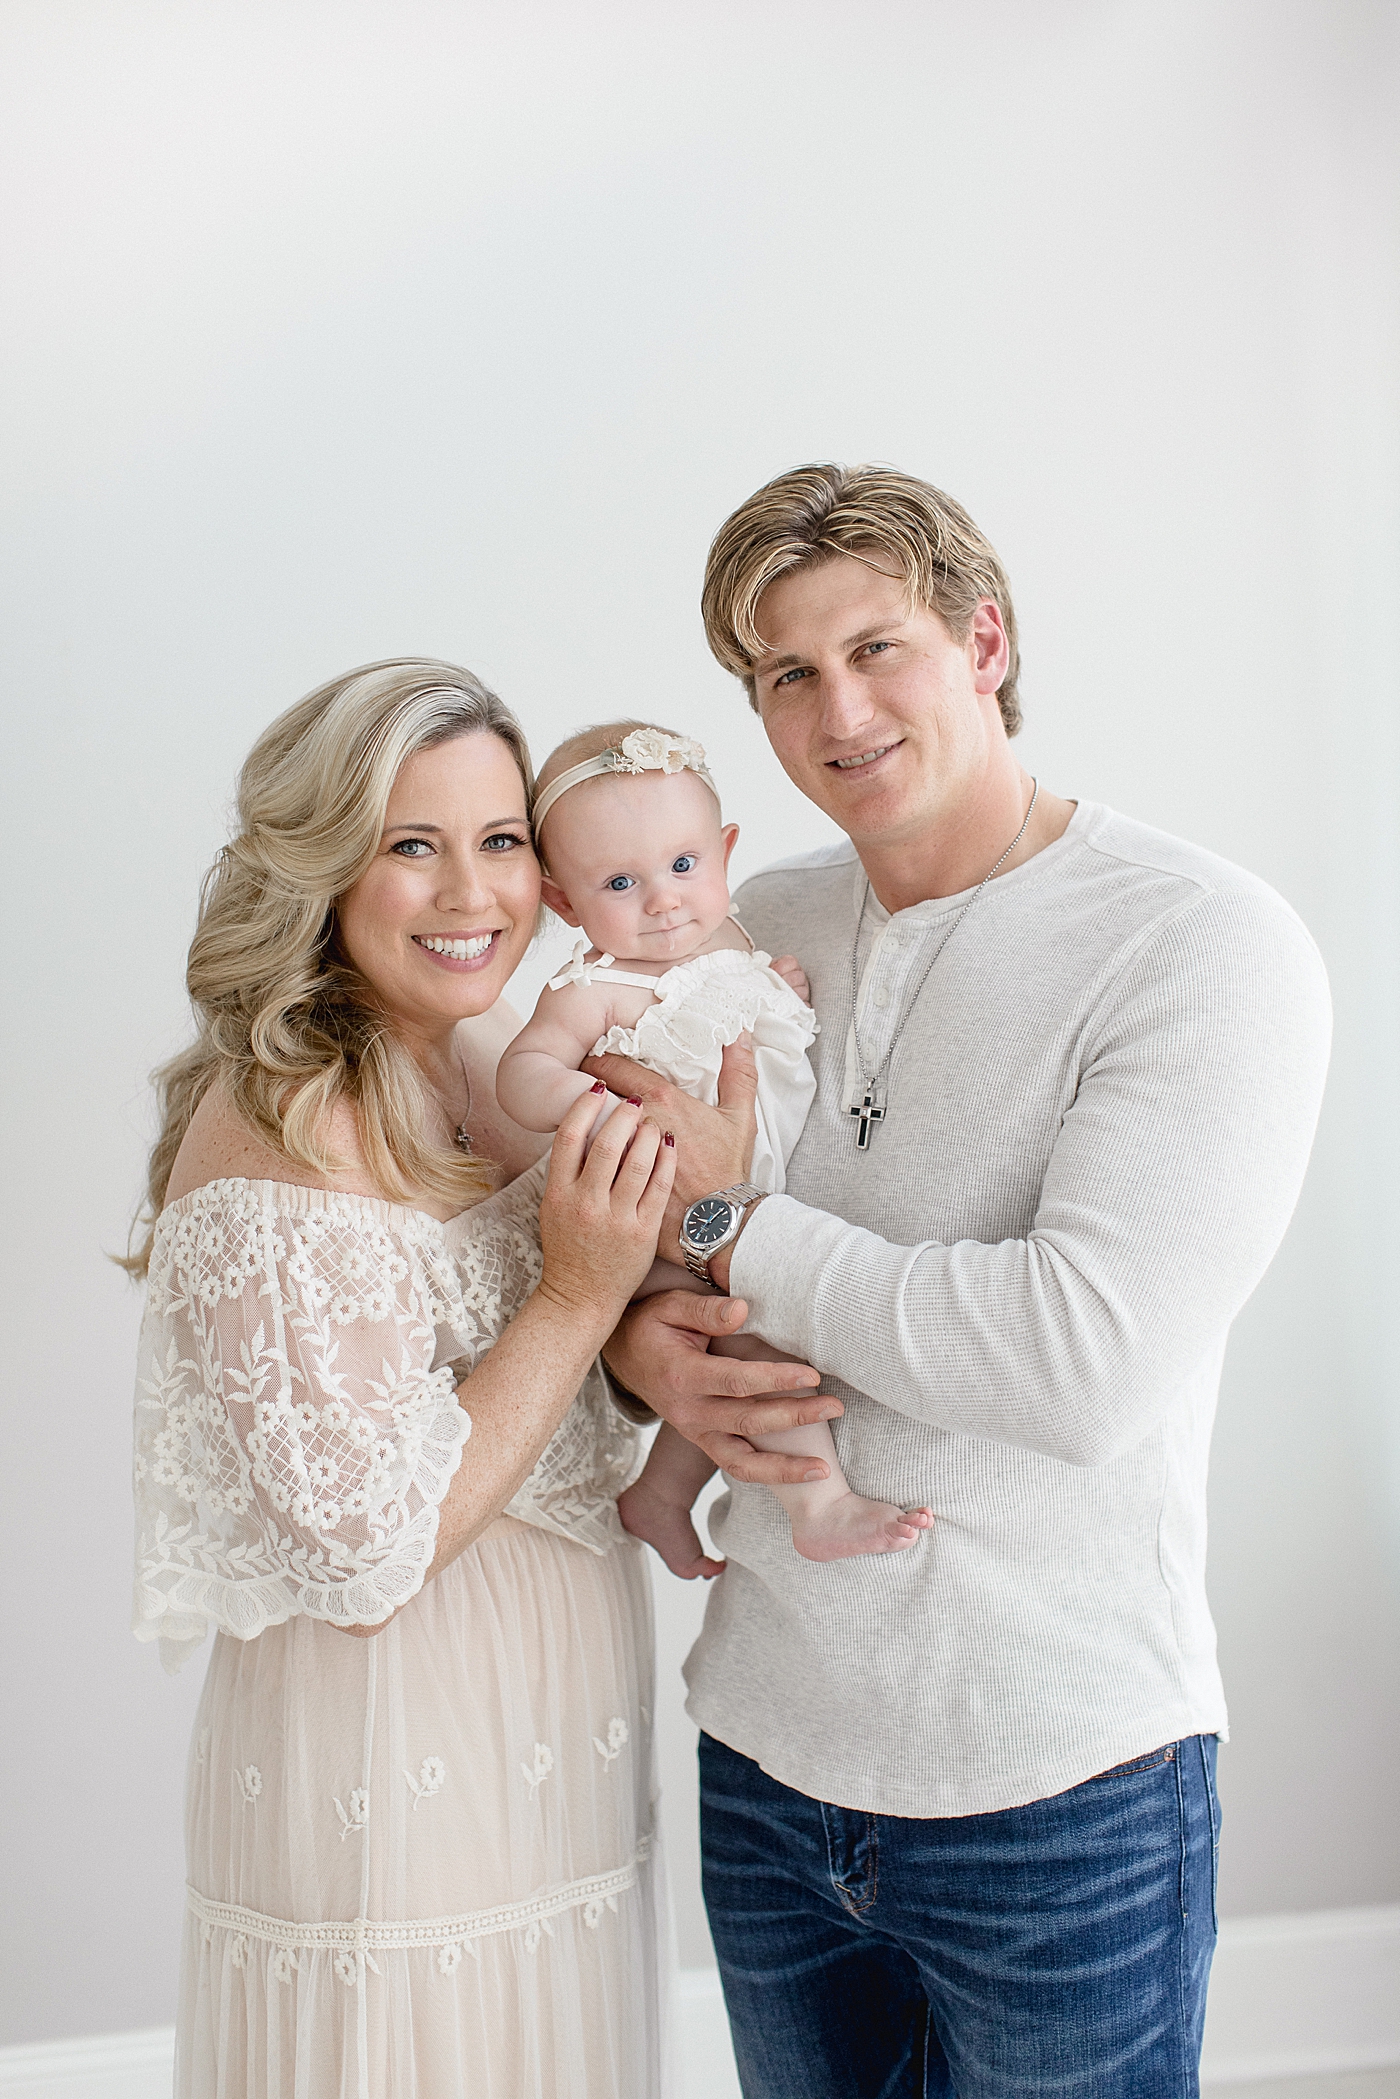 Family portrait at baby girls six-month milestone session. Photo by Brittany Elise Photography.